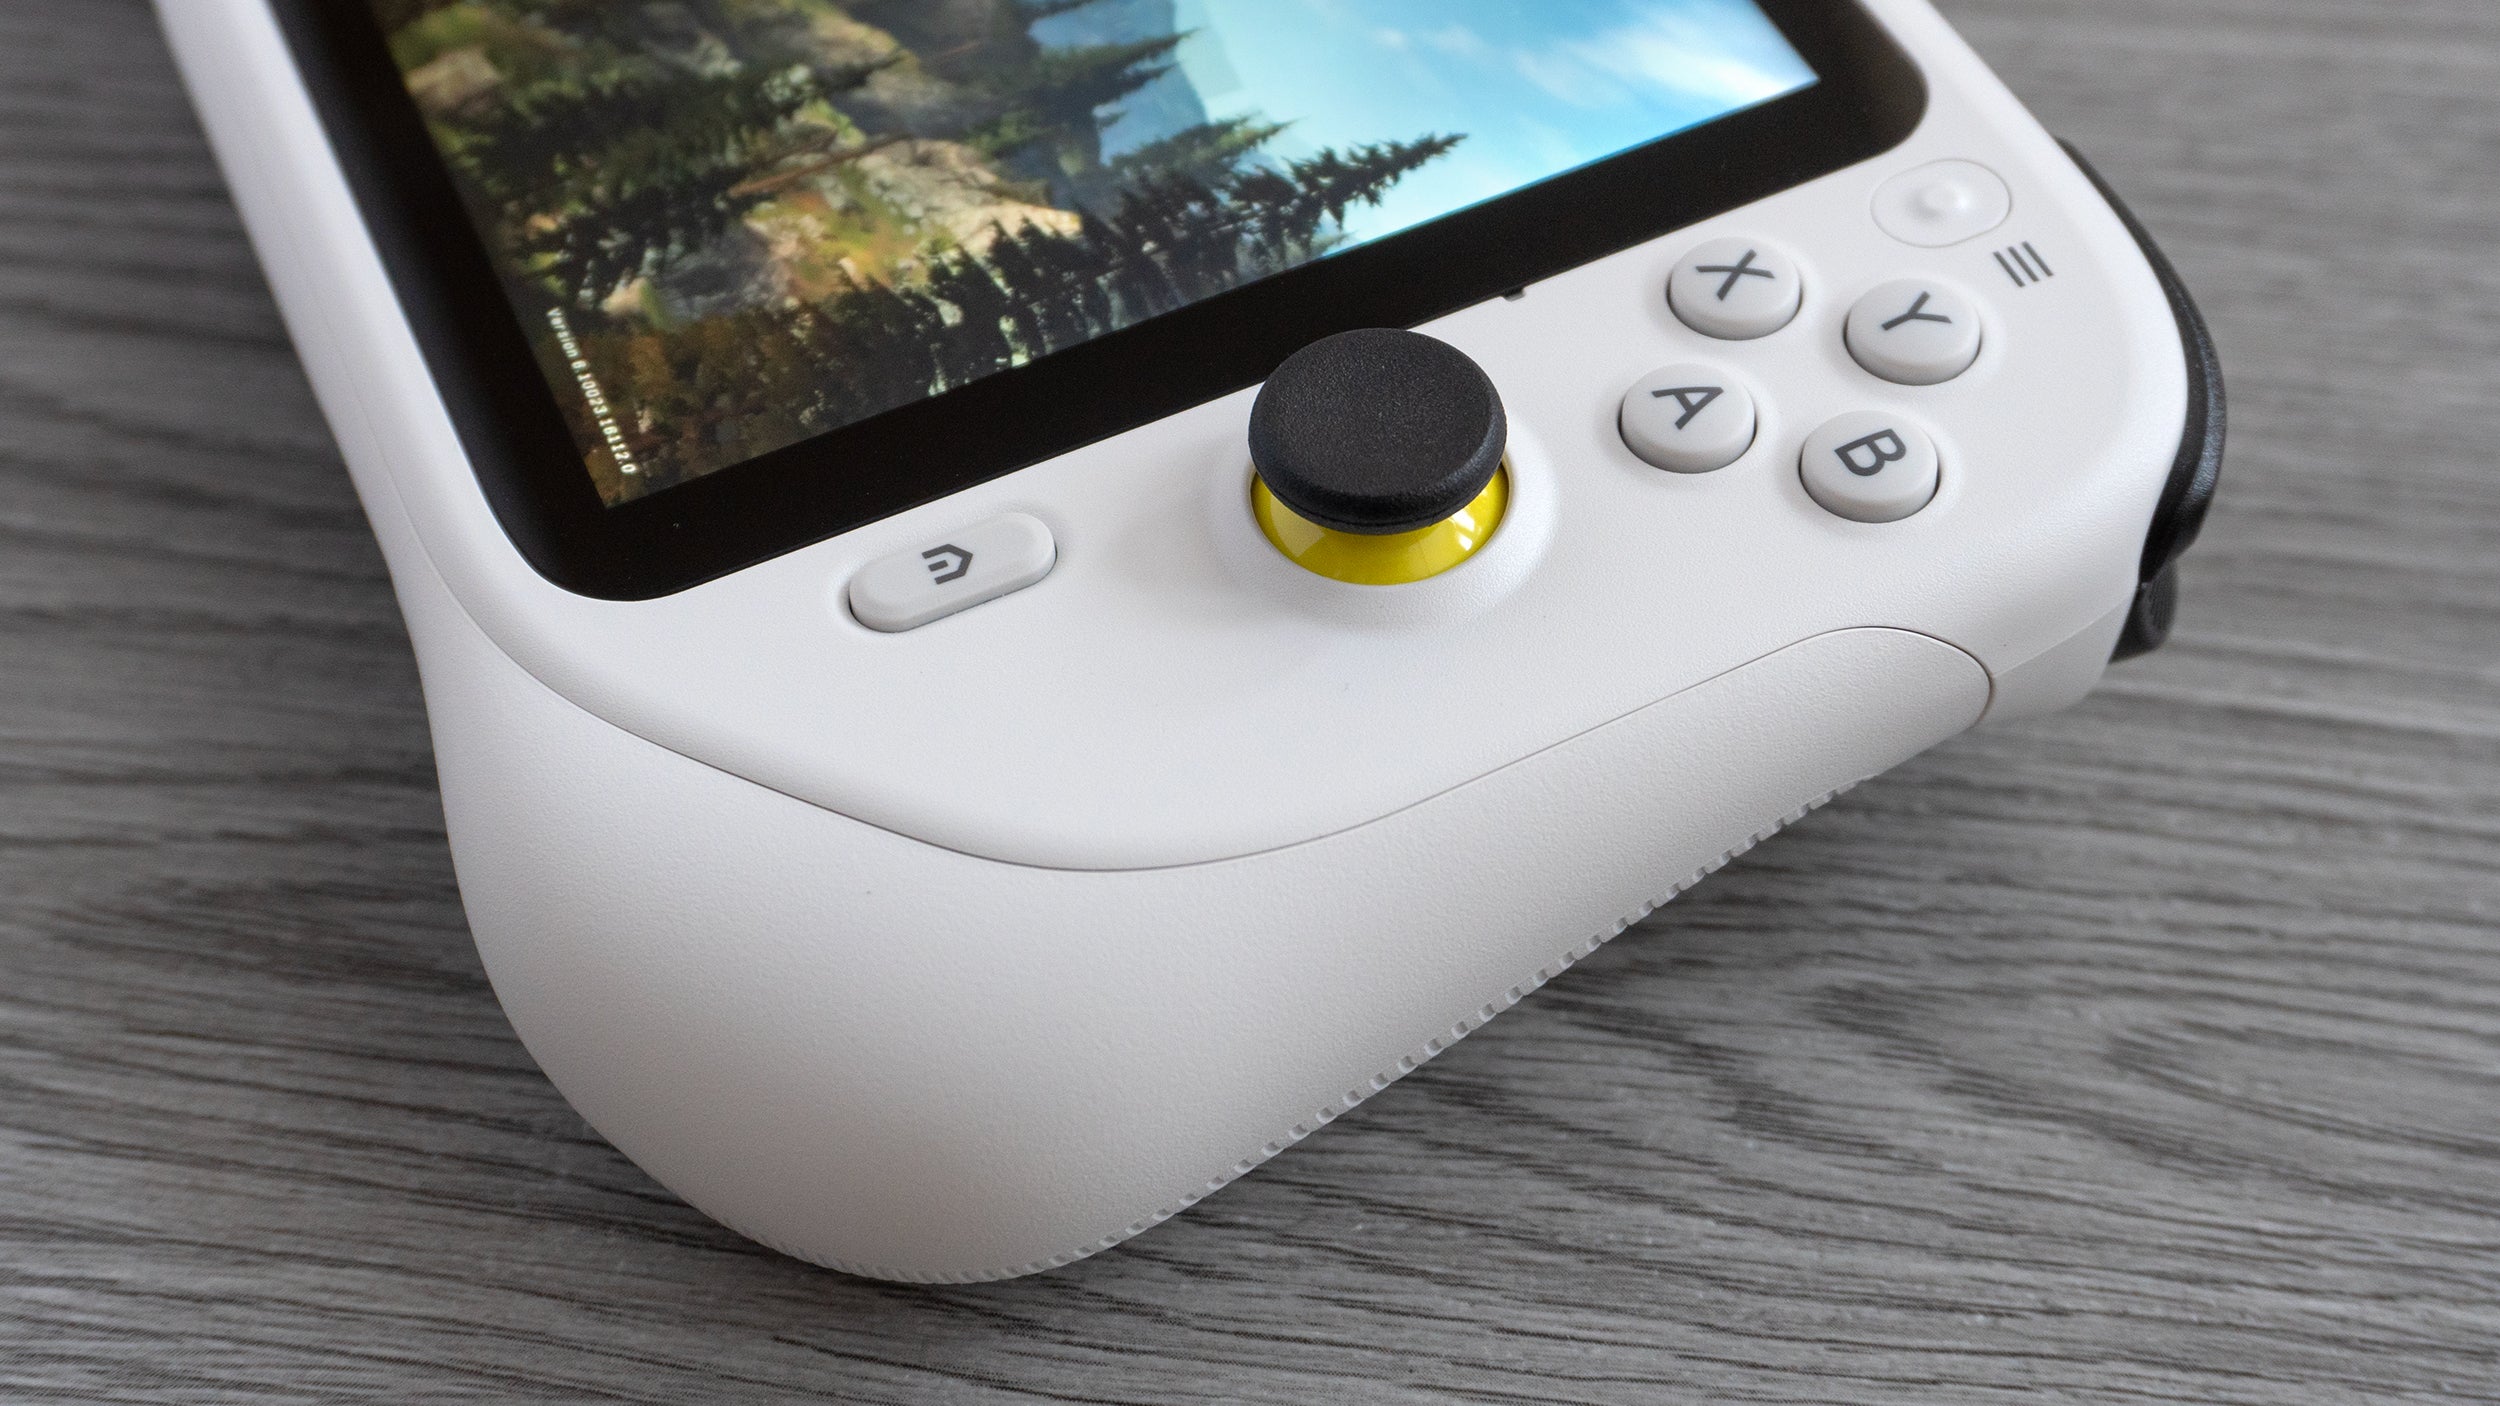 The action buttons on the Logitech G Cloud feel great, but also feel like they sink too far into the handheld when pressed. (Photo: Andrew Liszewski | Gizmodo)